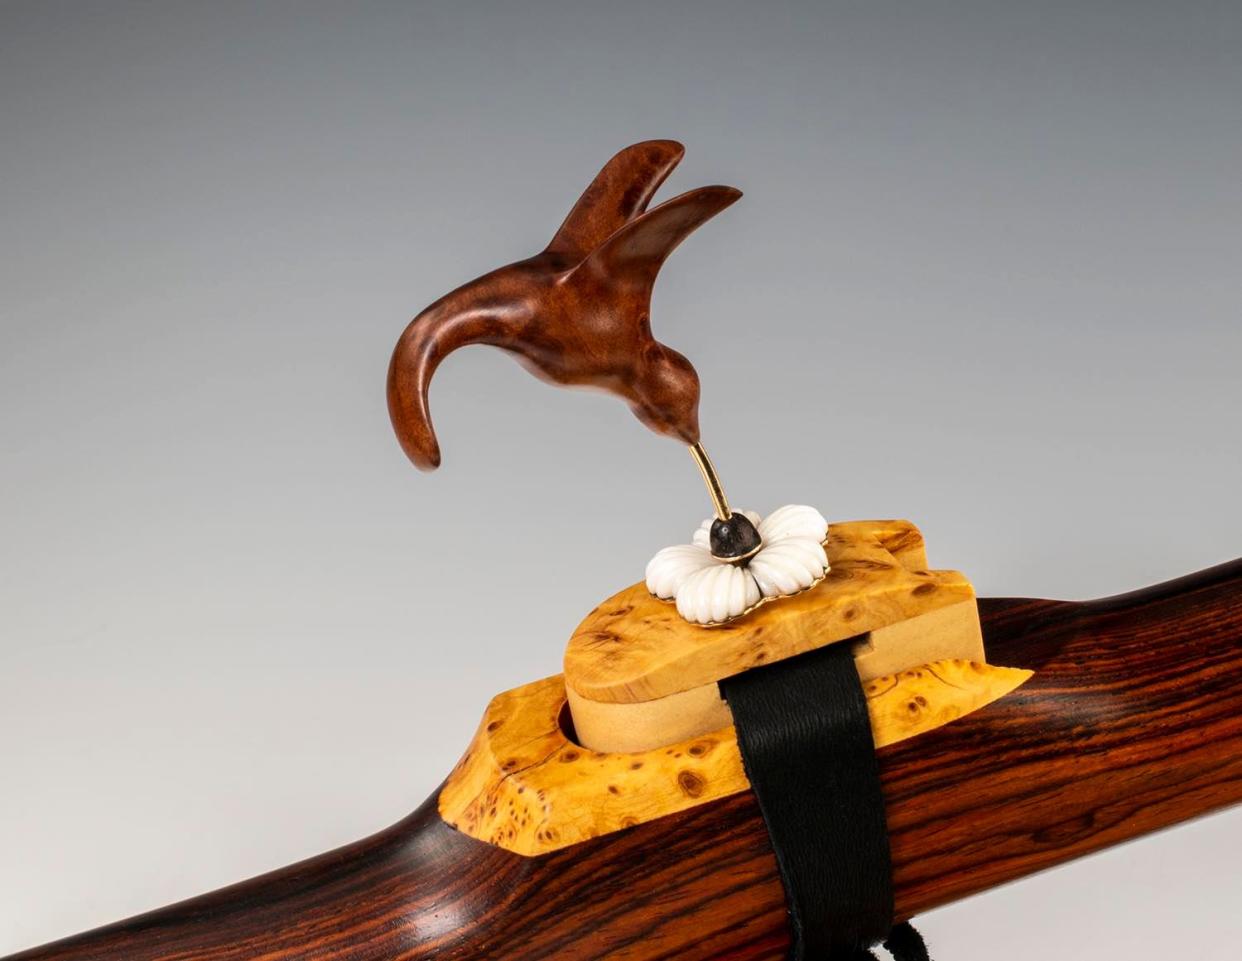 This wooden flute featuring a gold-beaked hummingbird by Bad River Chippewa and Comanche artist Tim Blueflint Ramel will be available at the Autry American Indian Arts Marketplace at the Autry Museum of the American West in Los Angeles on Saturday, June 11 and Sunday, June 12. (Tim Blueflint Ramel)